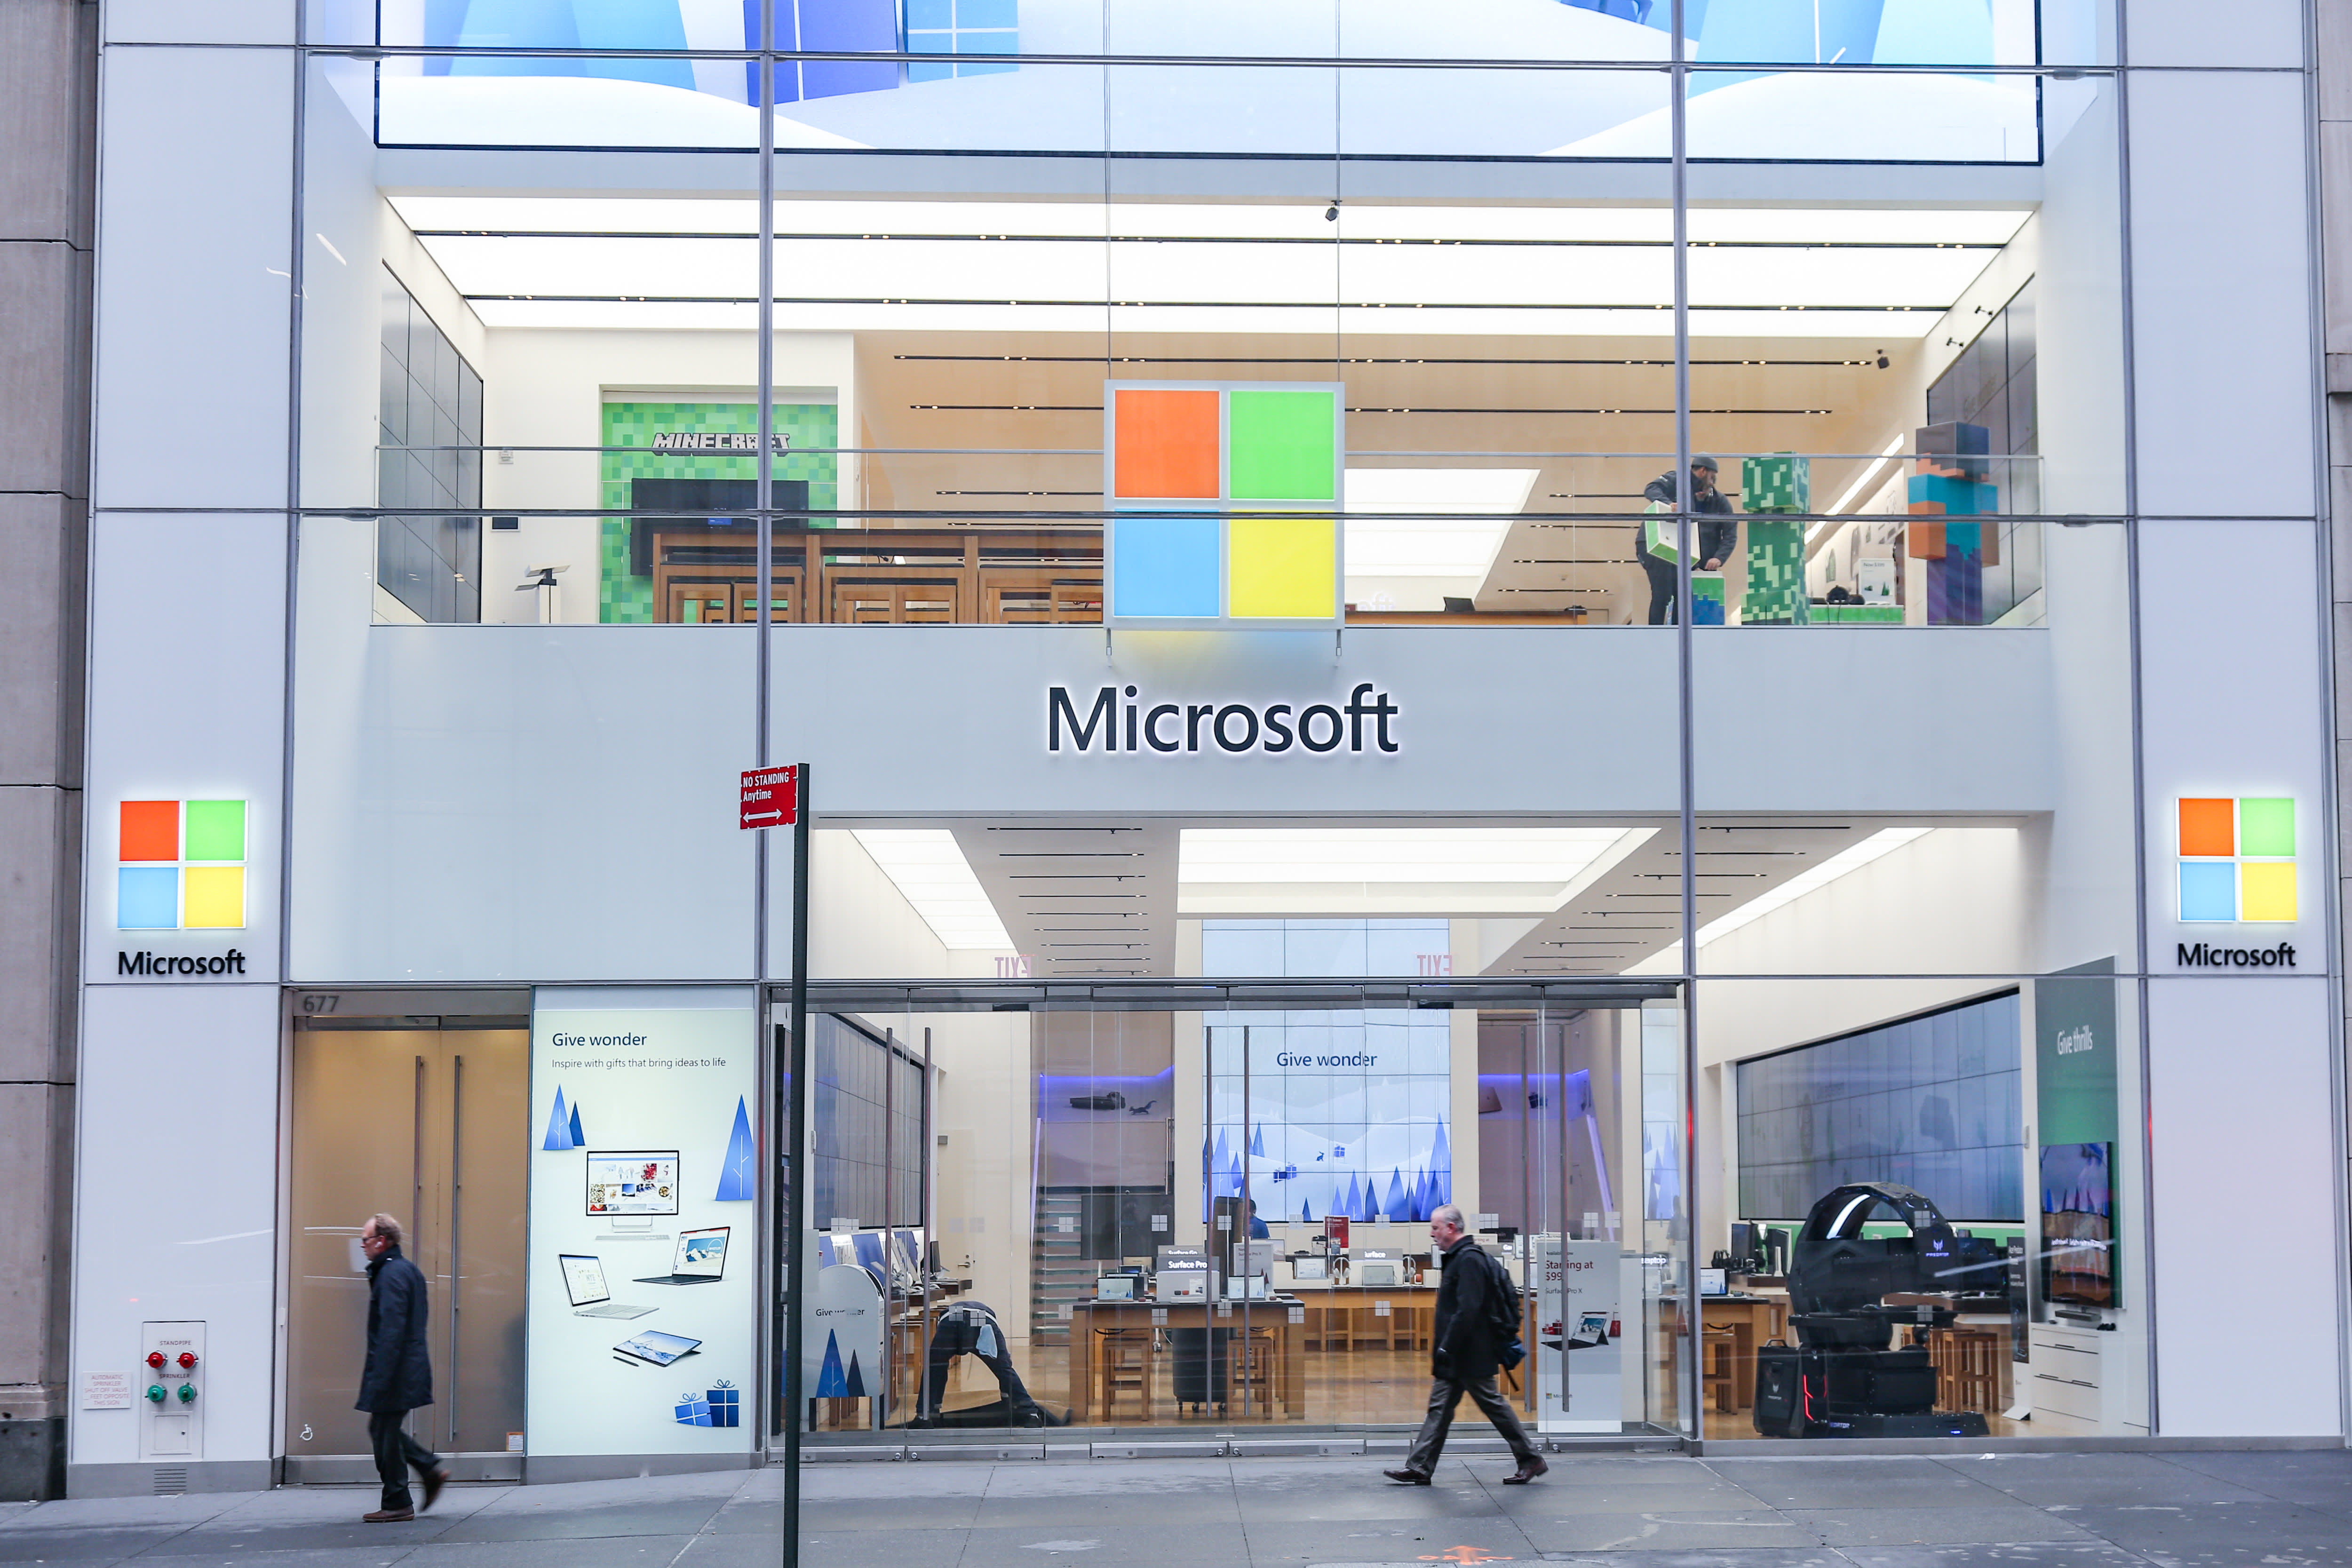 See Microsoft's New Flagship Store Compared to An Apple Store